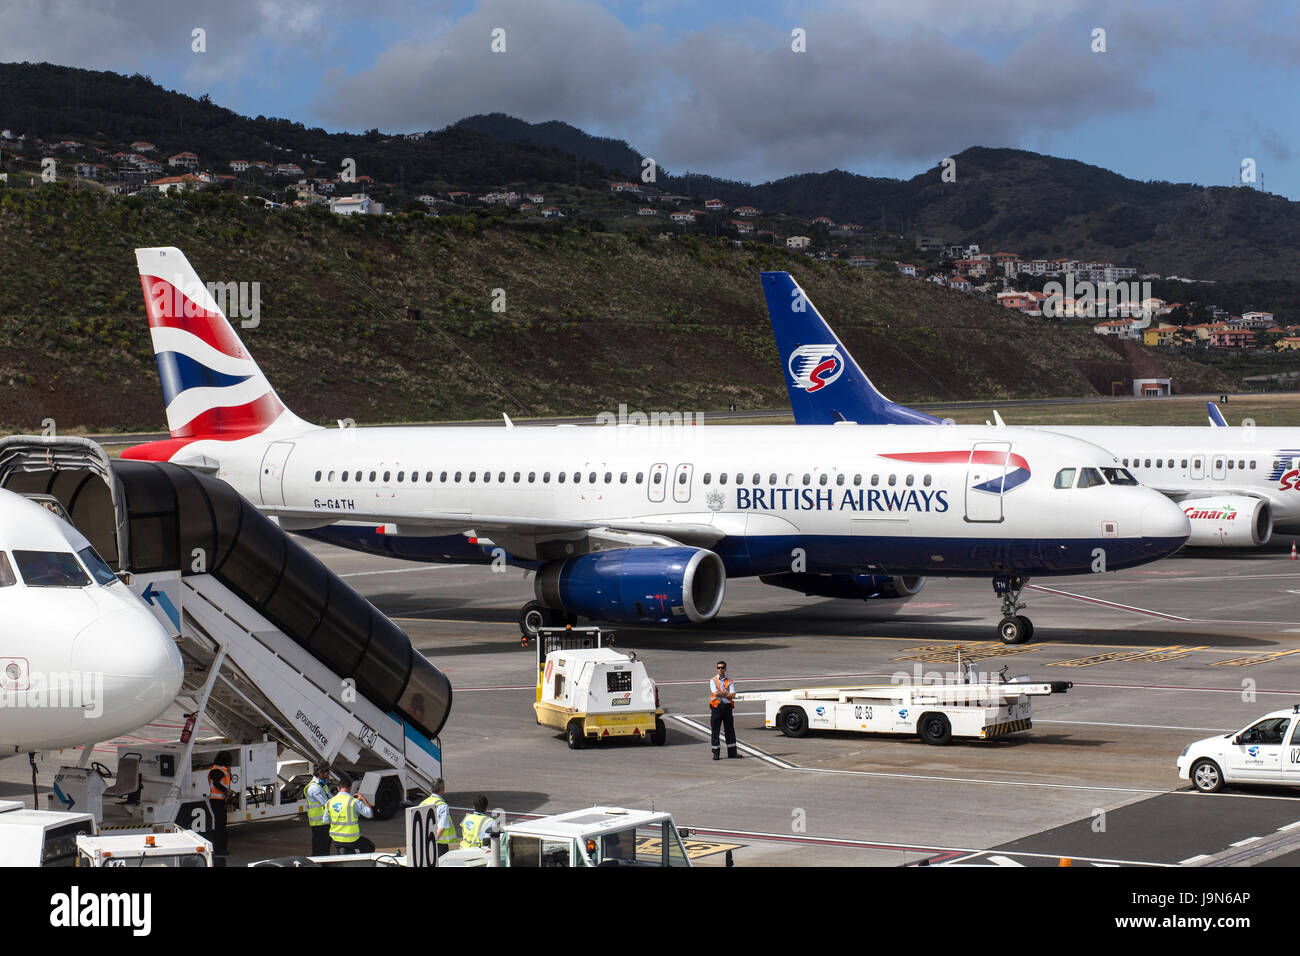 British Airways Airbus A320 on the apron at Madeira Airport, near Fuchal, recently renamed Christiano Ronaldo International Airport Stock Photo